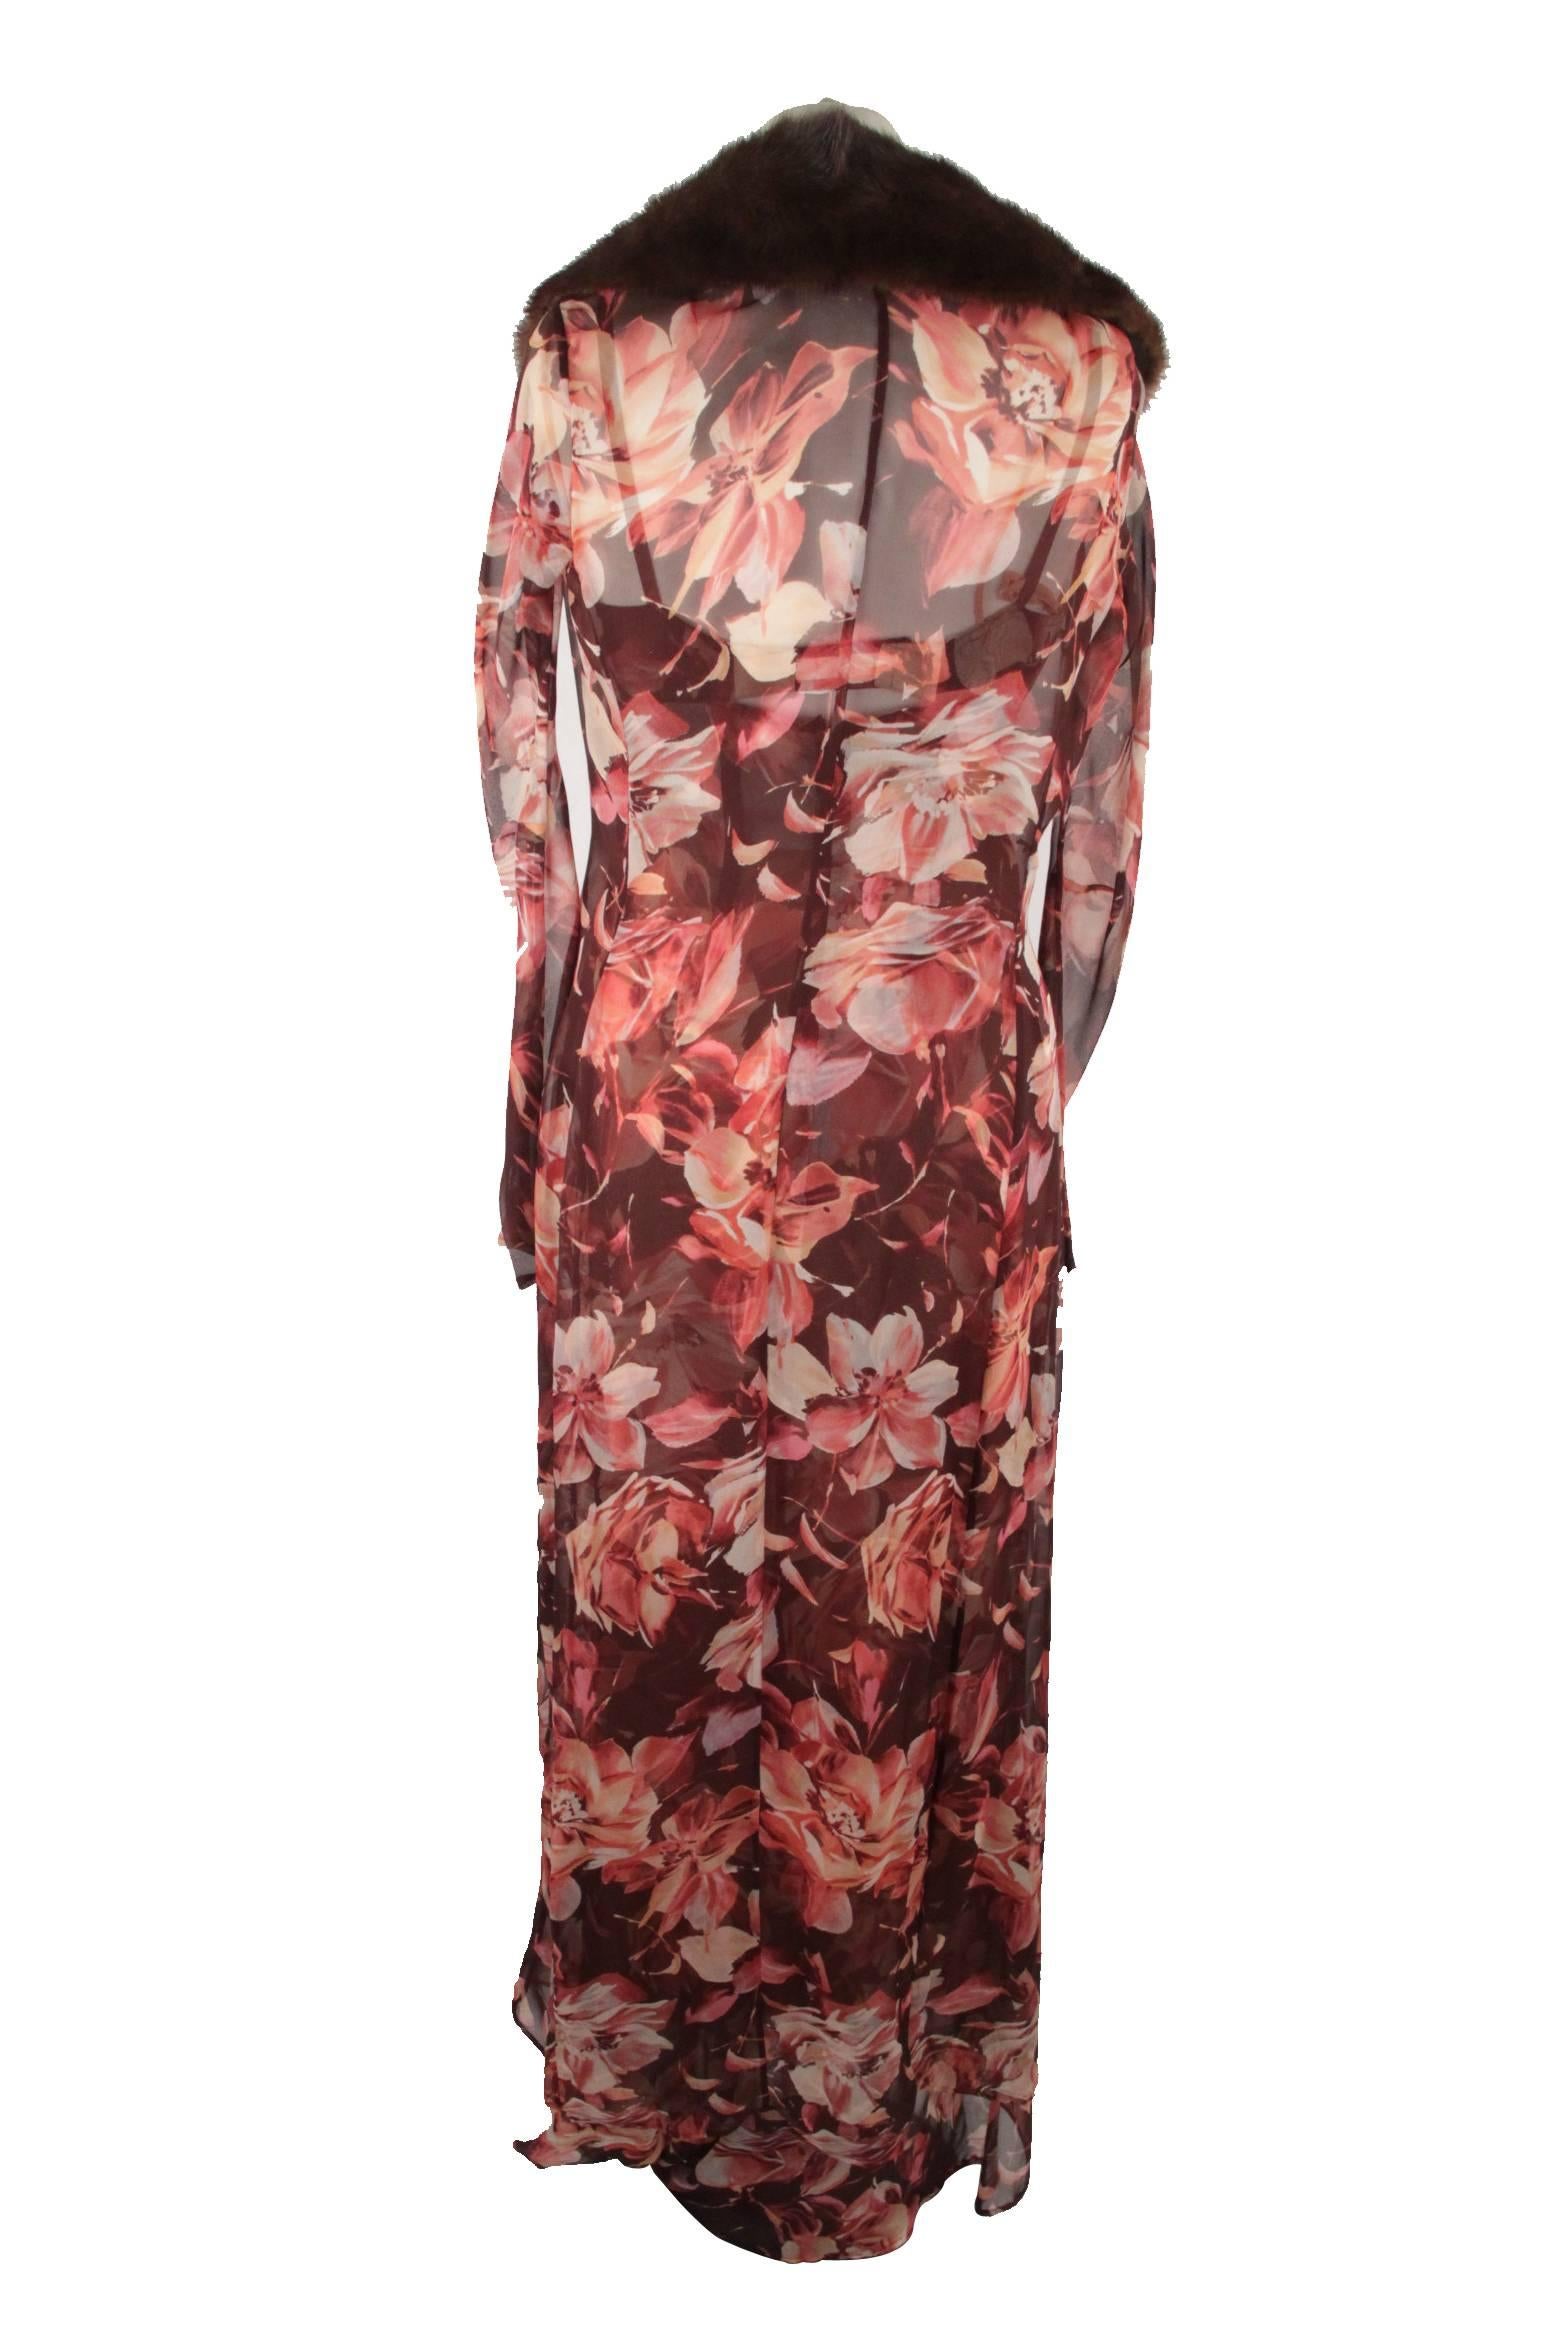 DOLCE & GABBANA Silk Floral MAXI CAMI DRESS with Matching OVERCOAT Size 42 3